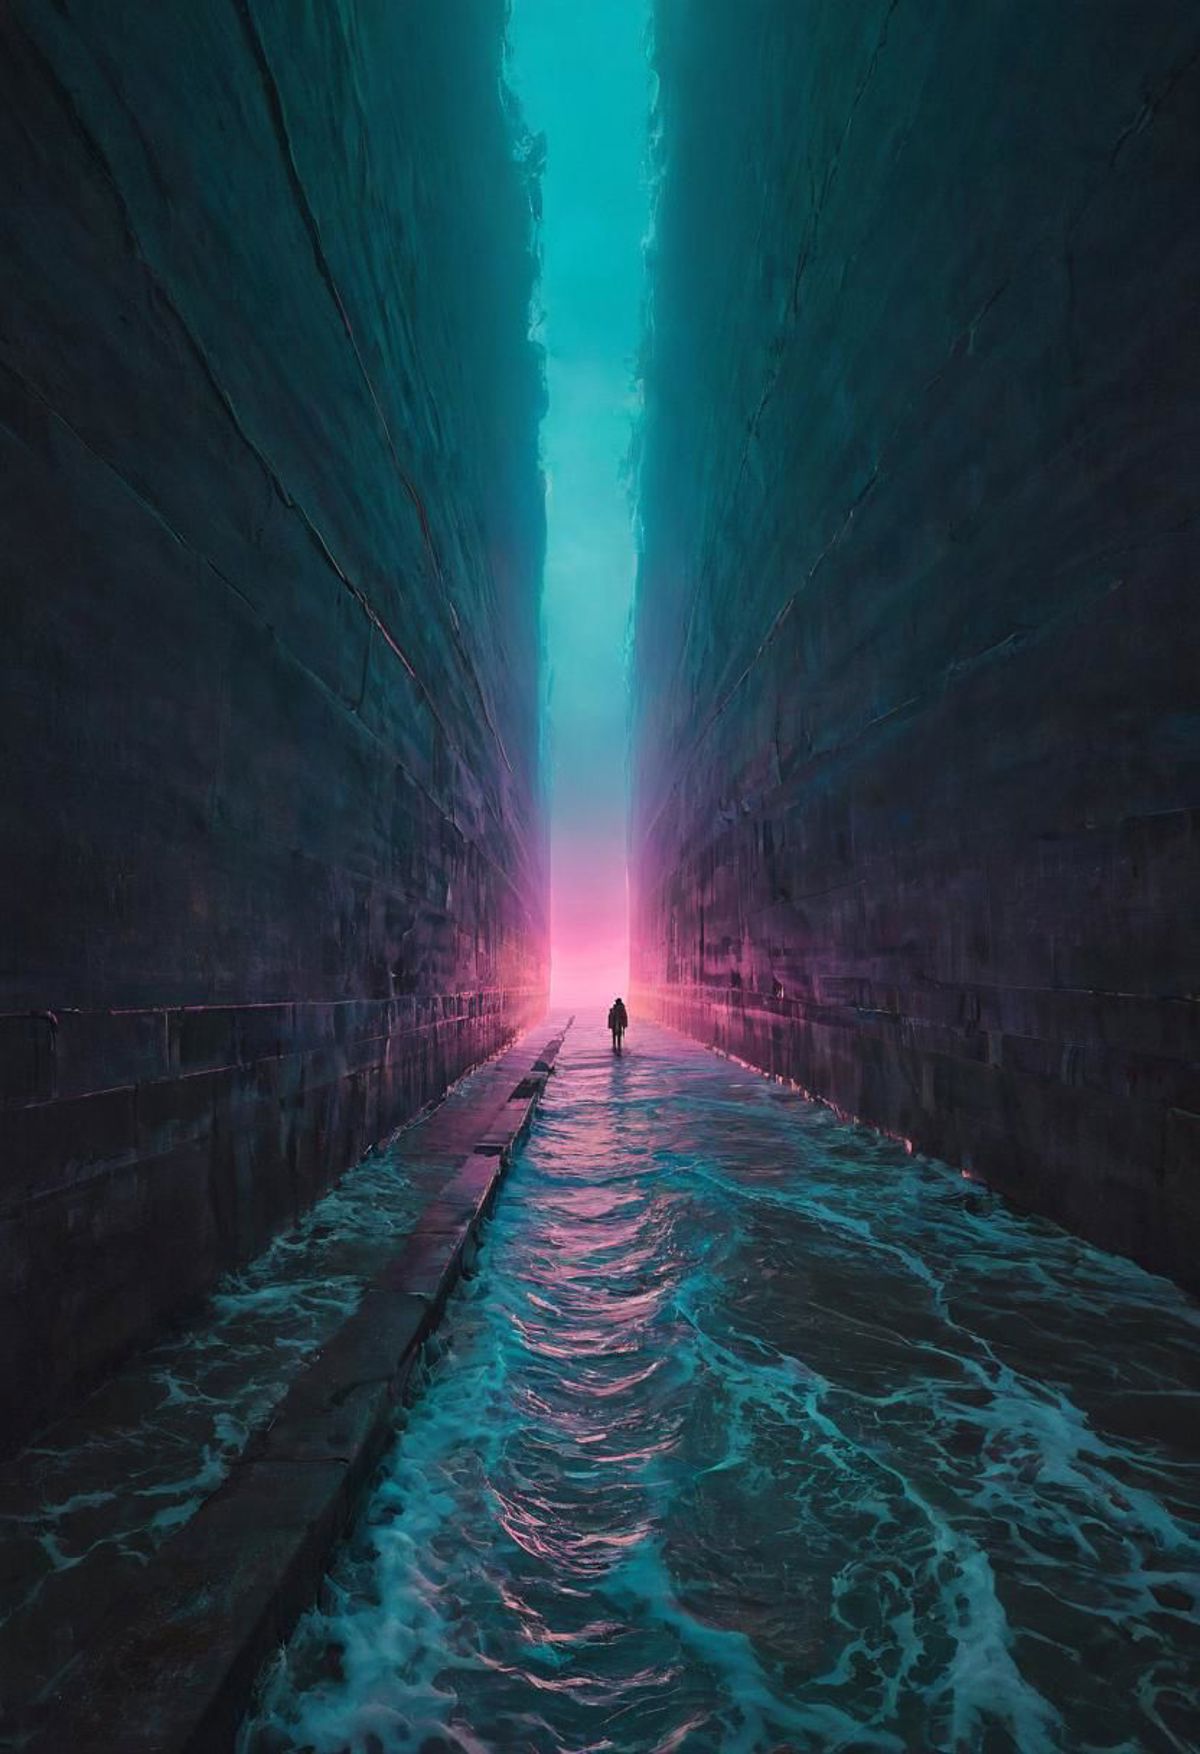 A person walking alone in a dark blue canal with a pink sky in the background, surrounded by brick walls on both sides.